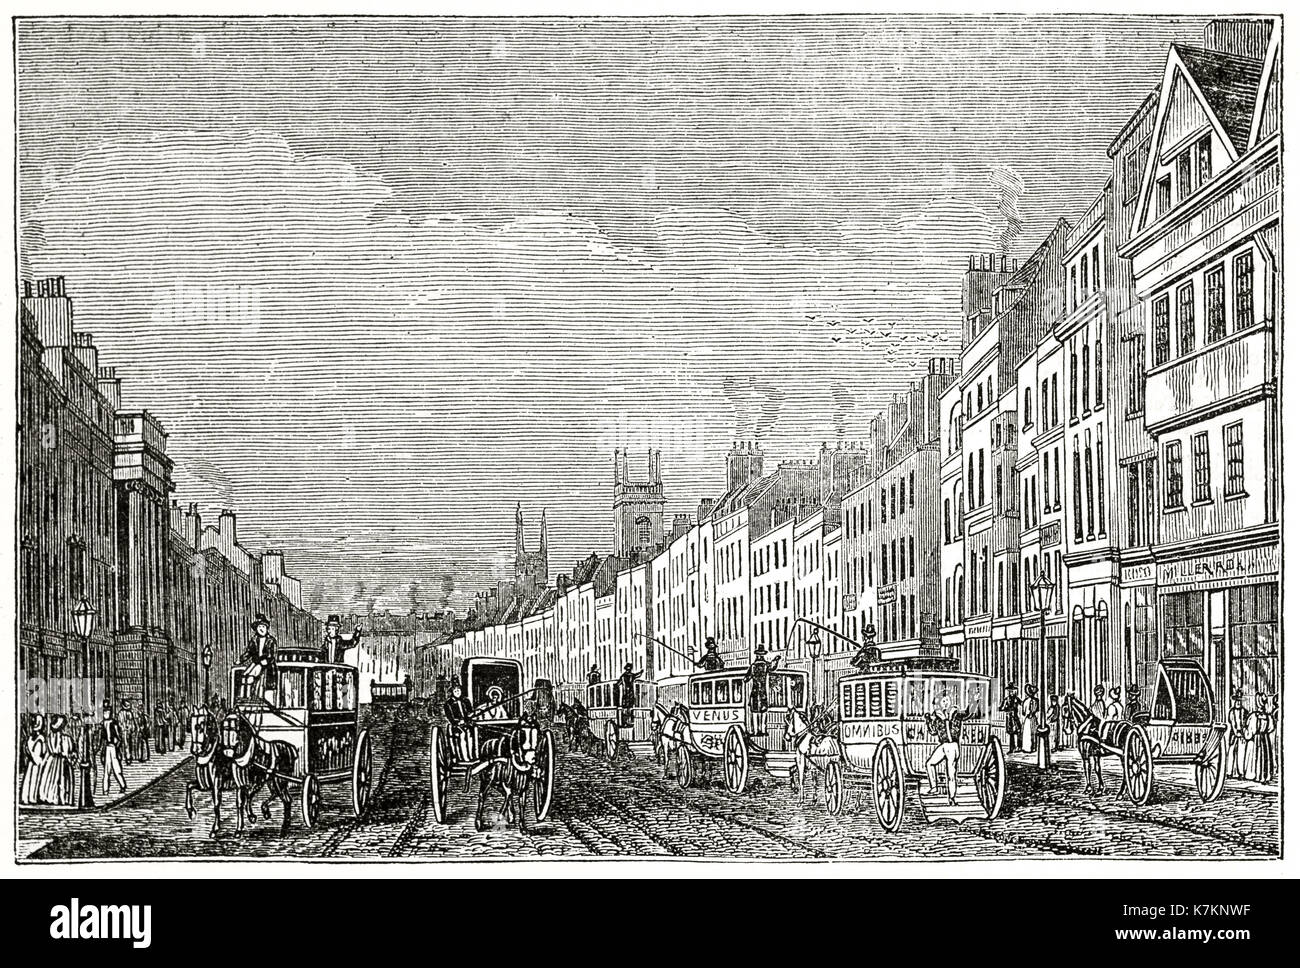 Old view of Holborn from Middle Row, London. By unidentified author, publ. on The Penny Magazine, London, 1837 Stock Photo